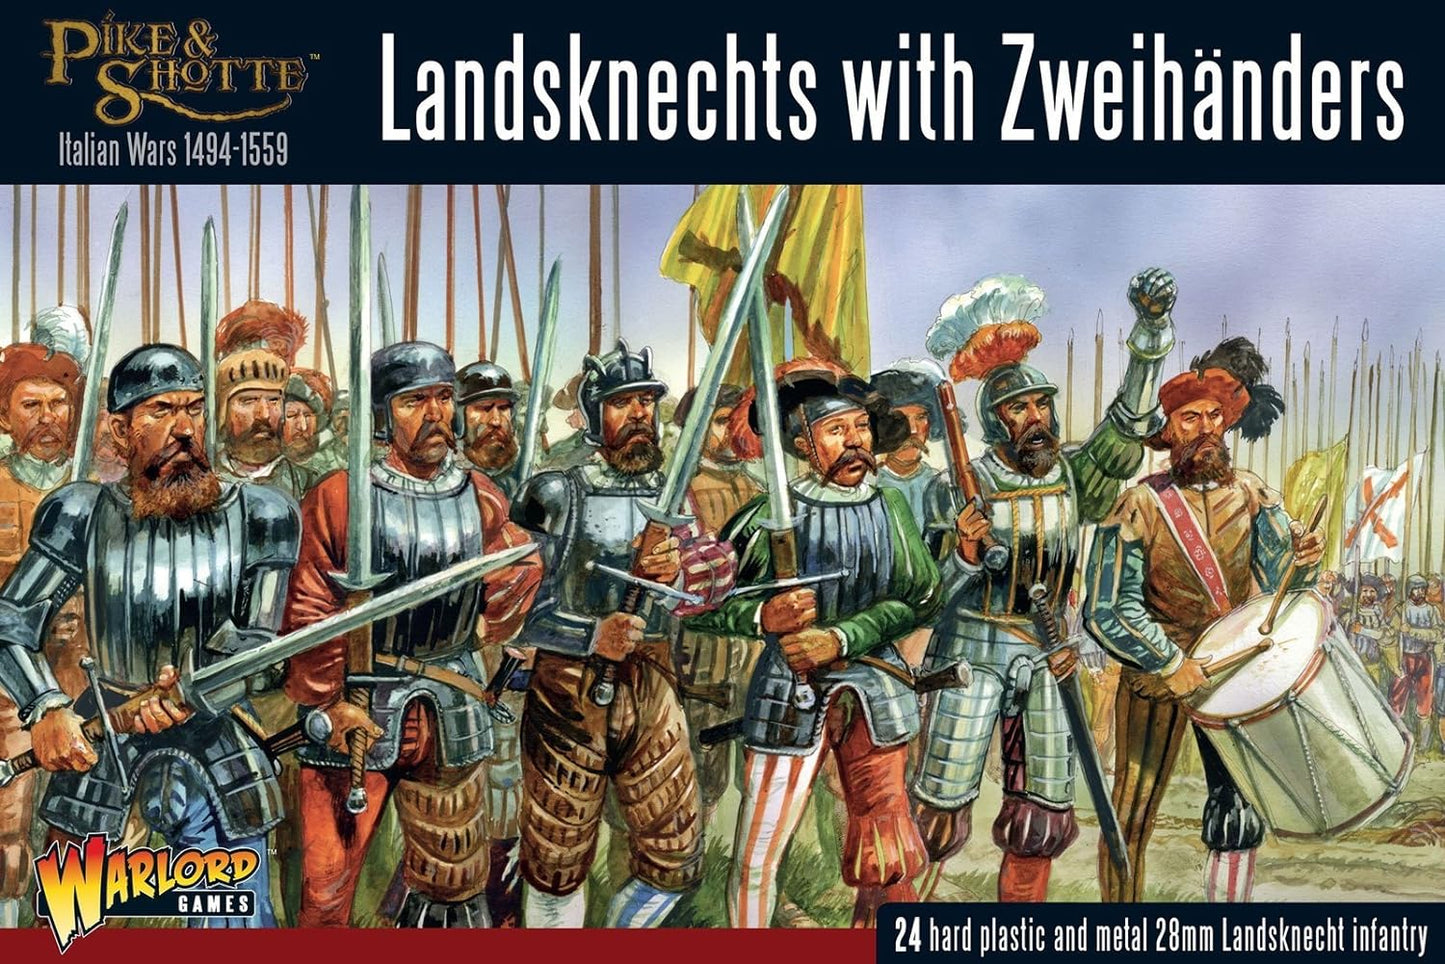 Warlord Games Pike and Shotthe - Landsknechts with Zweihanders, Wargaming Miniatures  #202016002